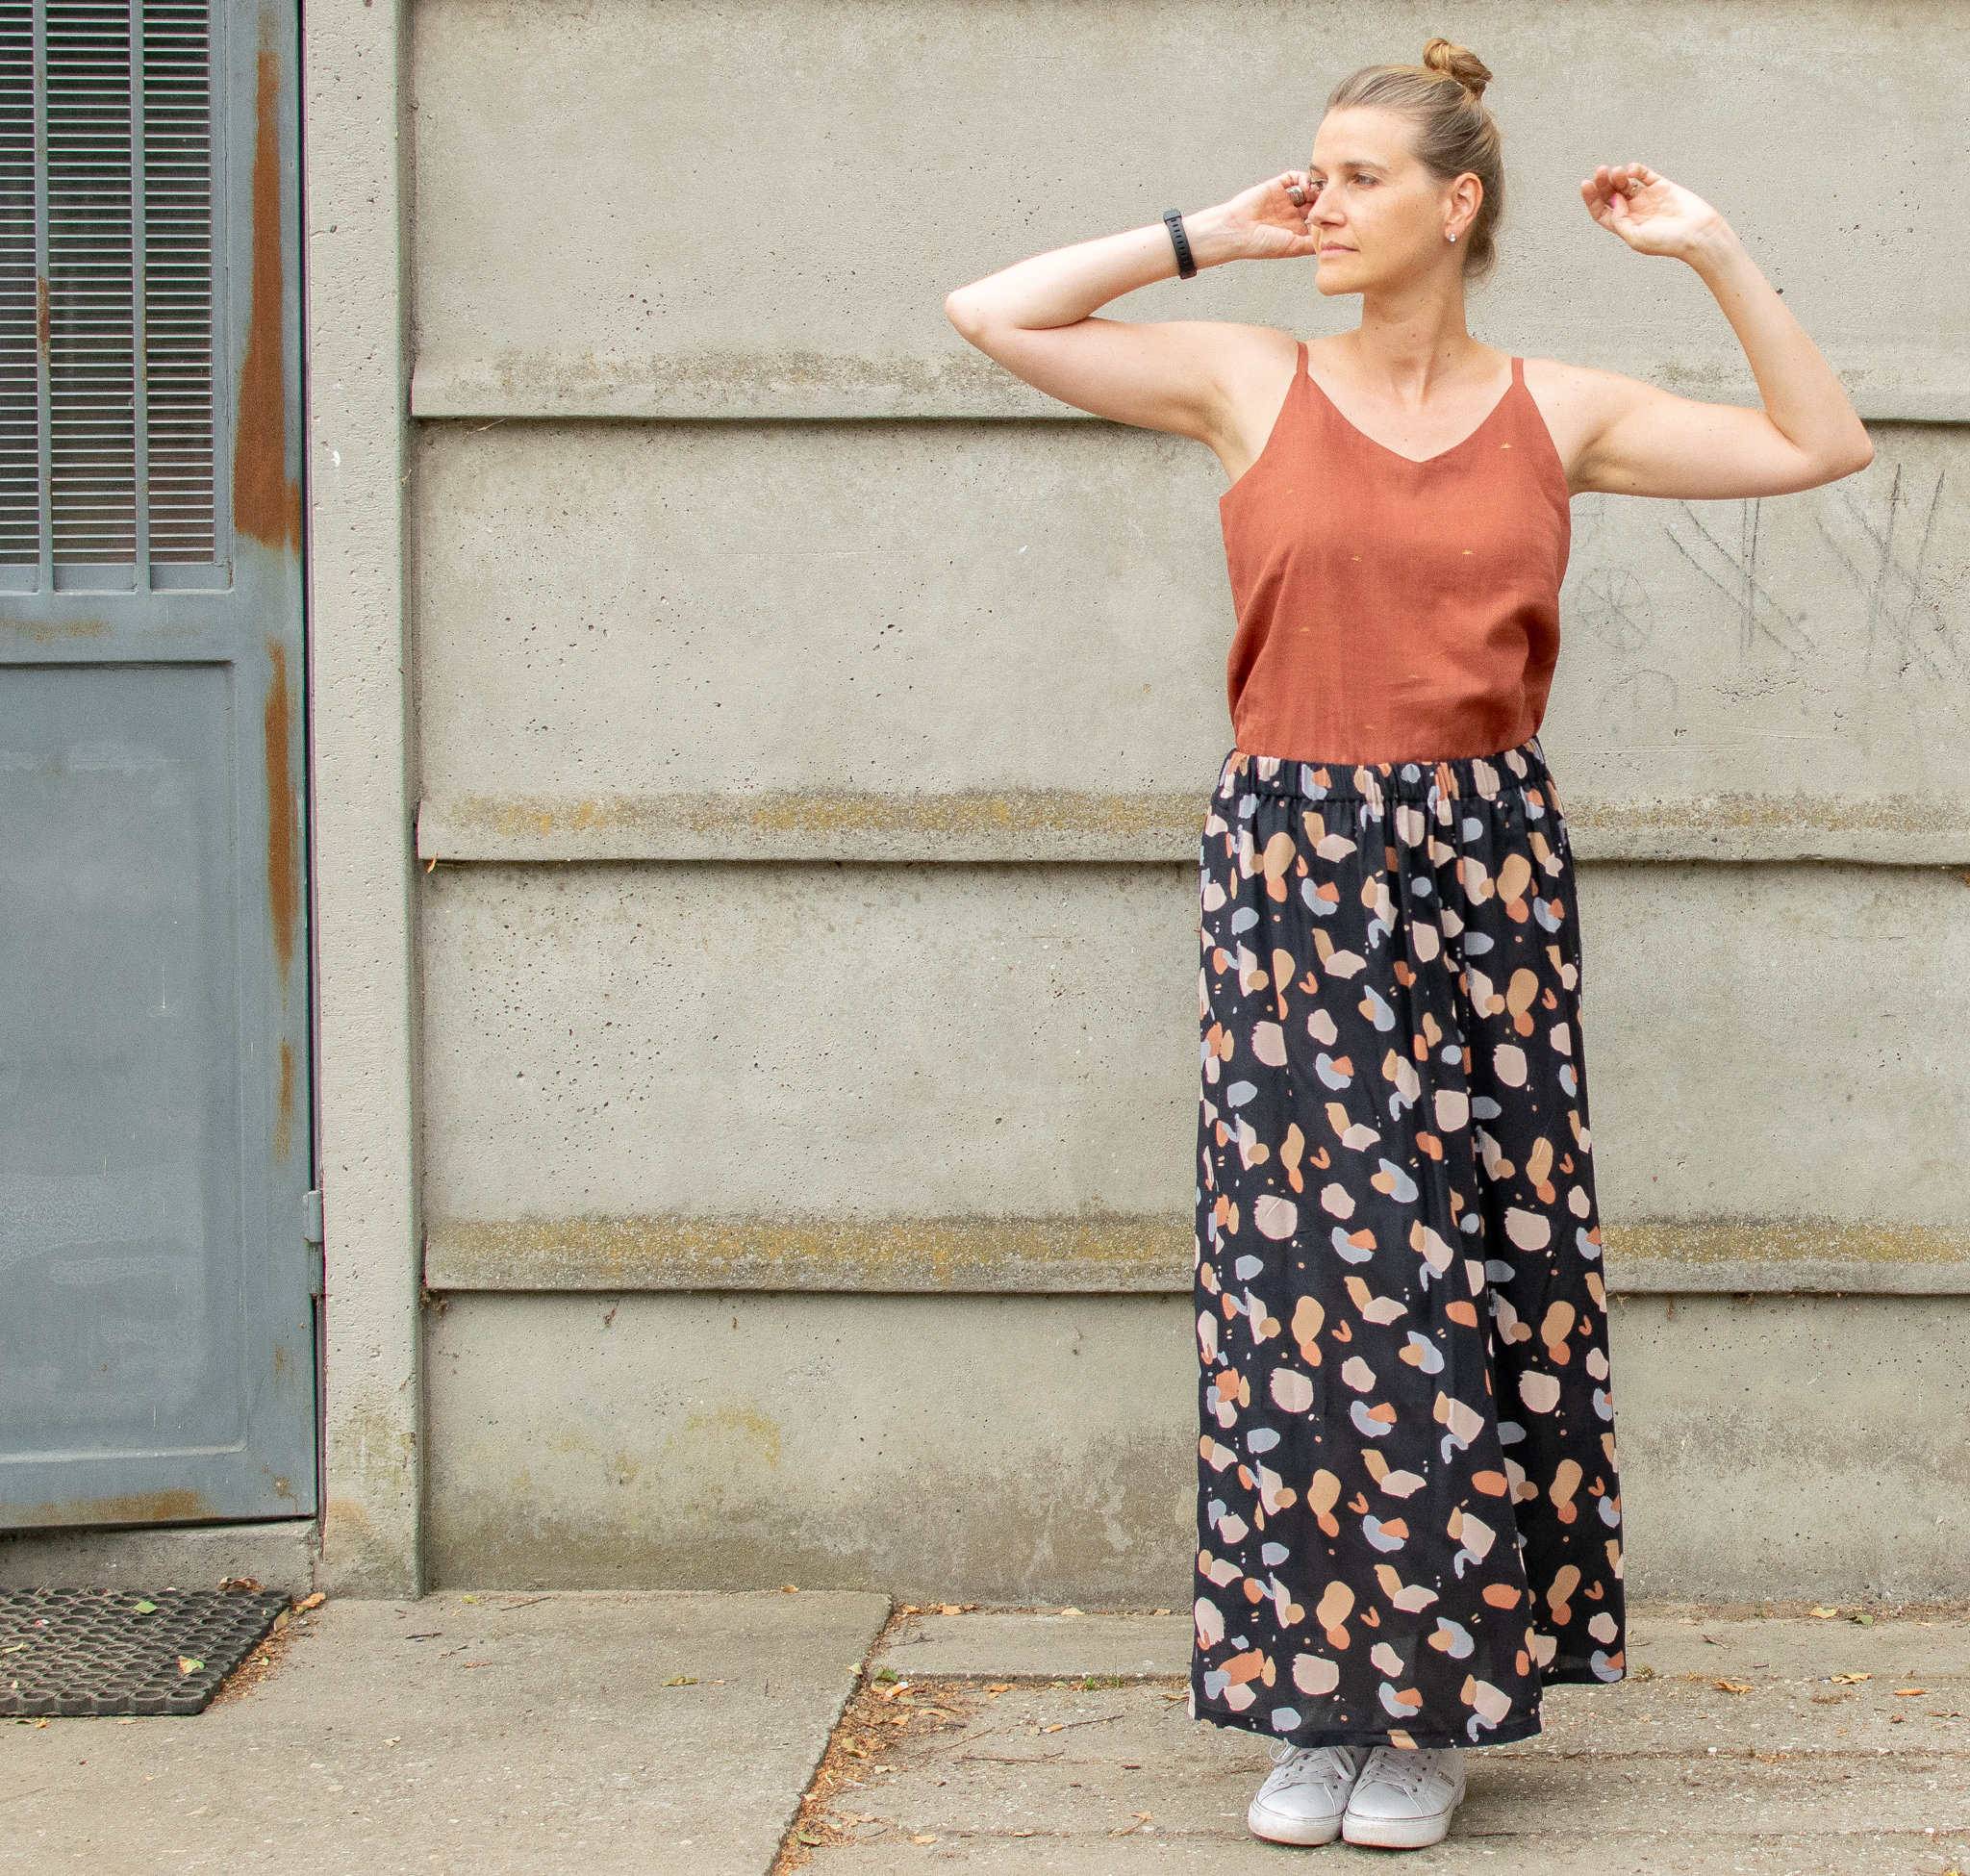 Skirt Alert: Embrace Simplicity And Style With Easy Skirt Sewing Patterns!